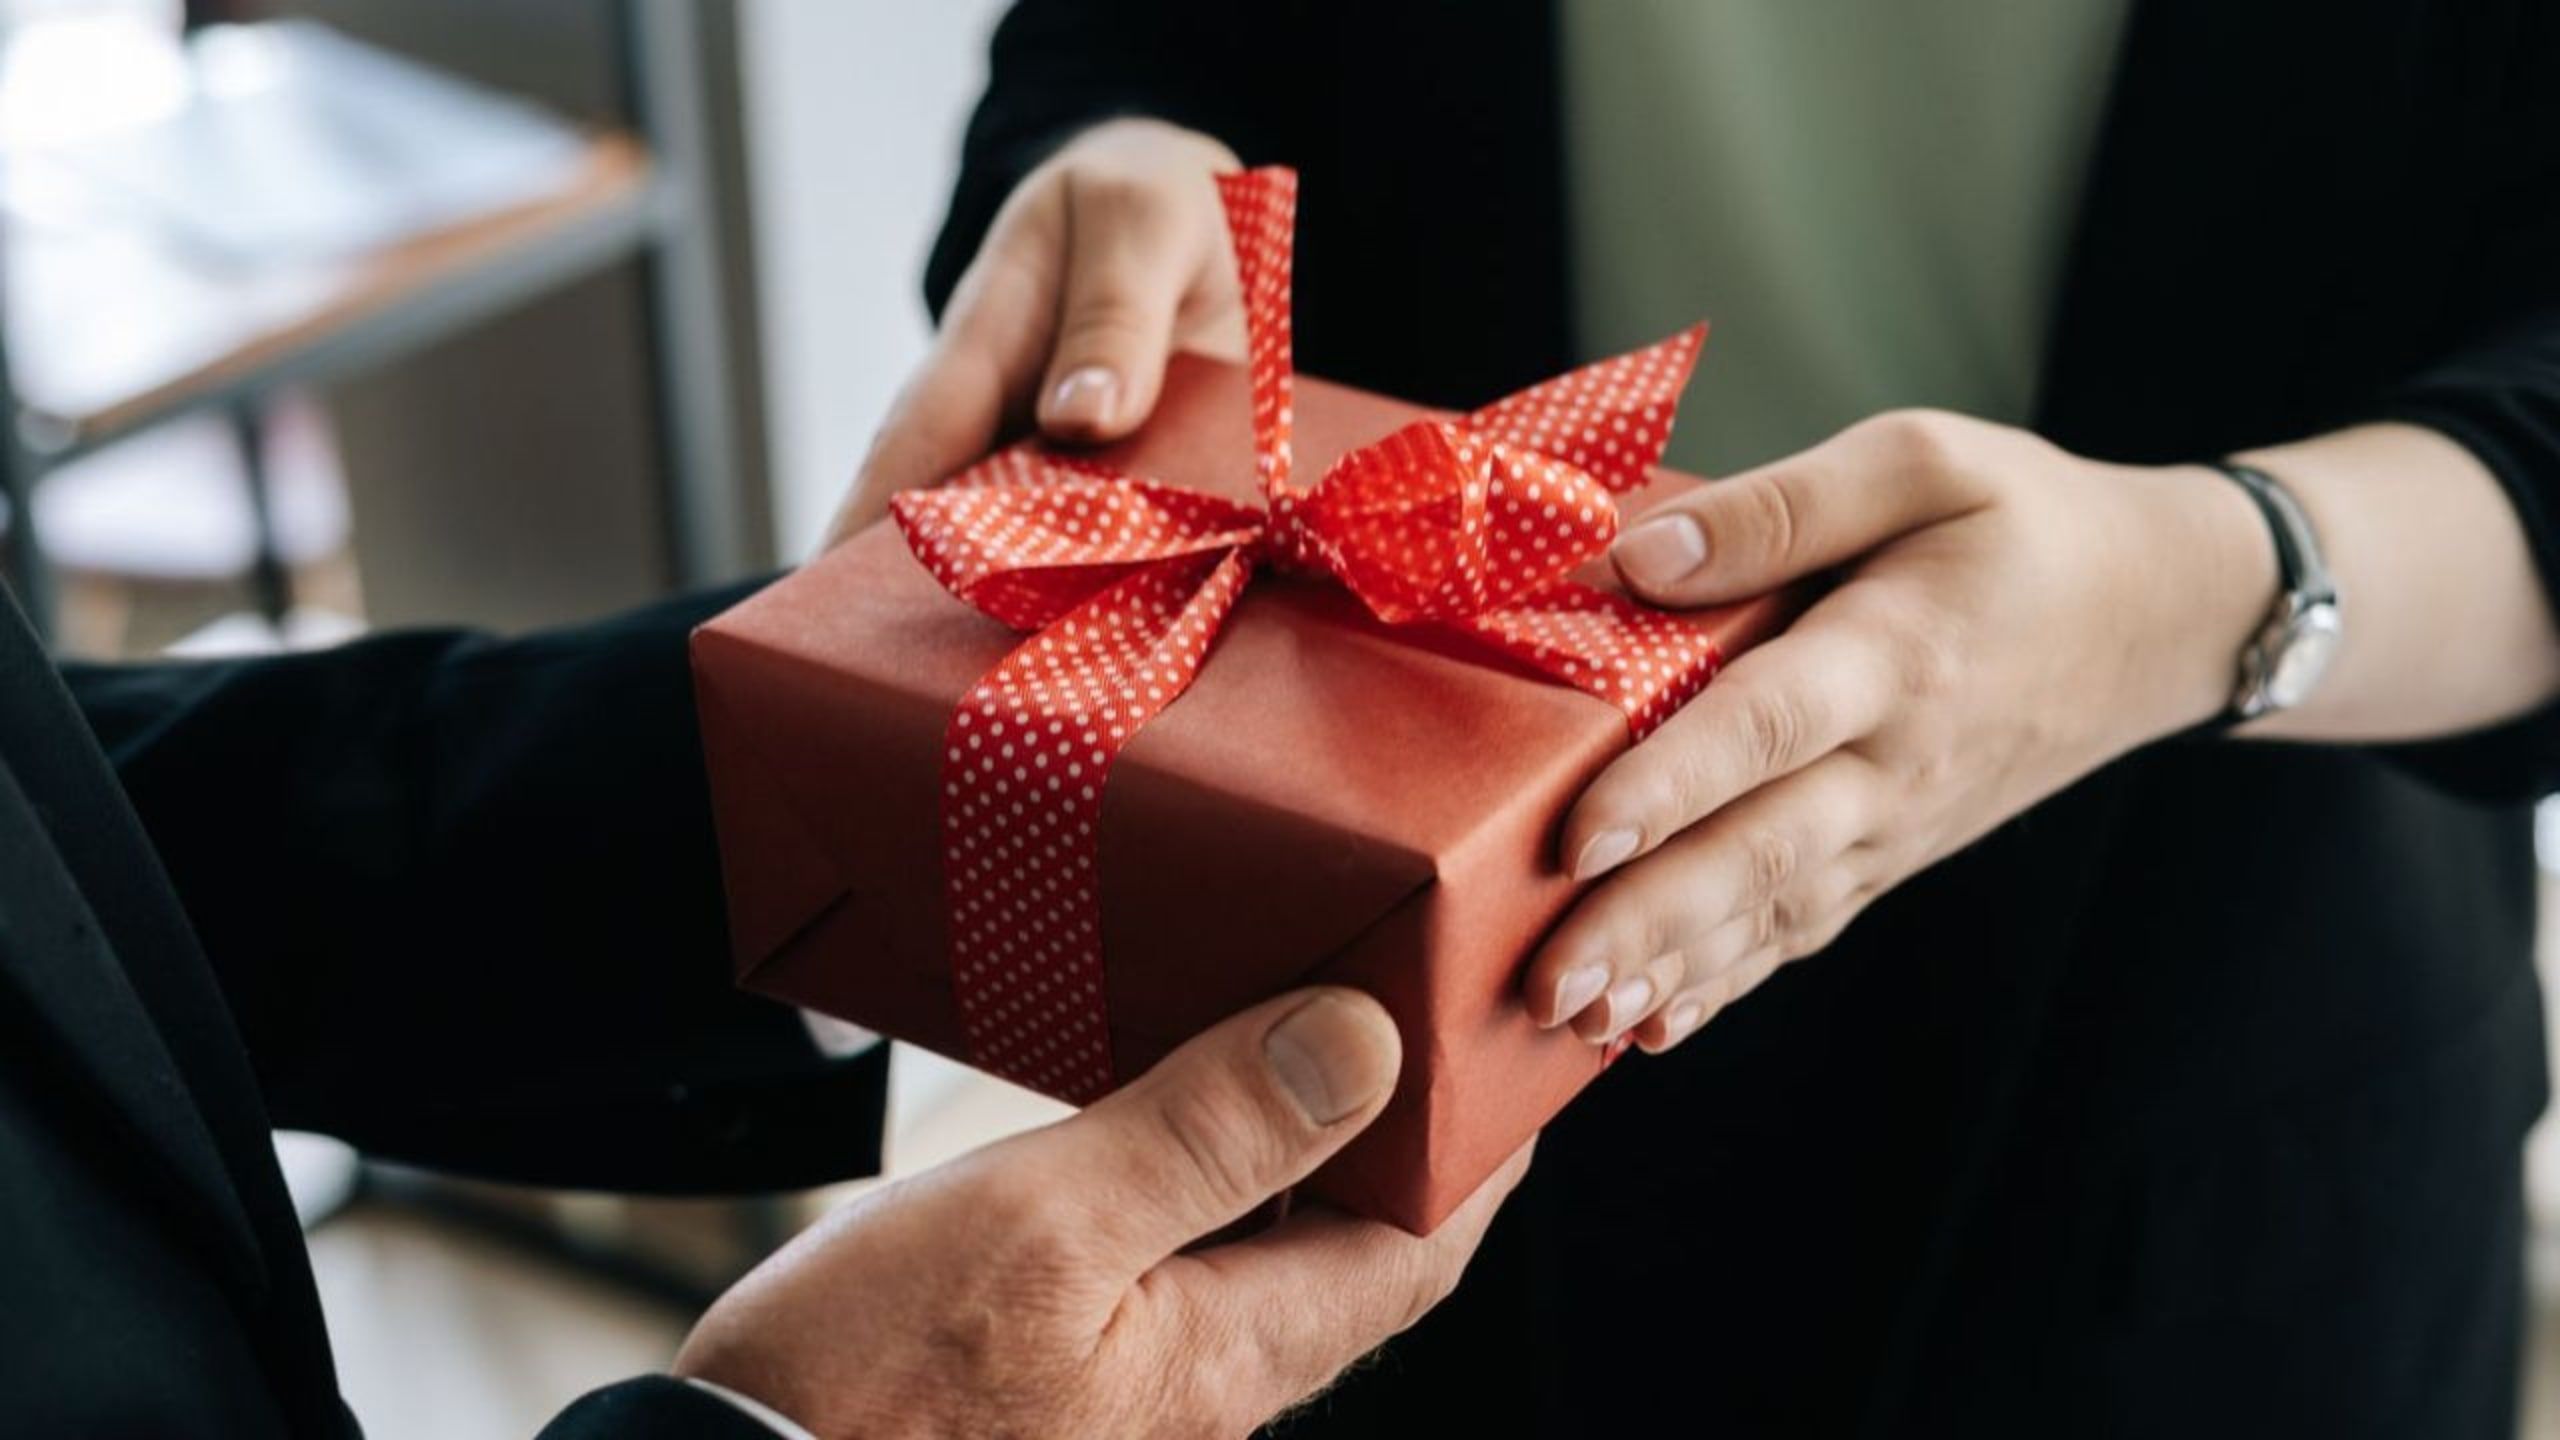 The 5 Most Creative Gifts for Employees in 2022